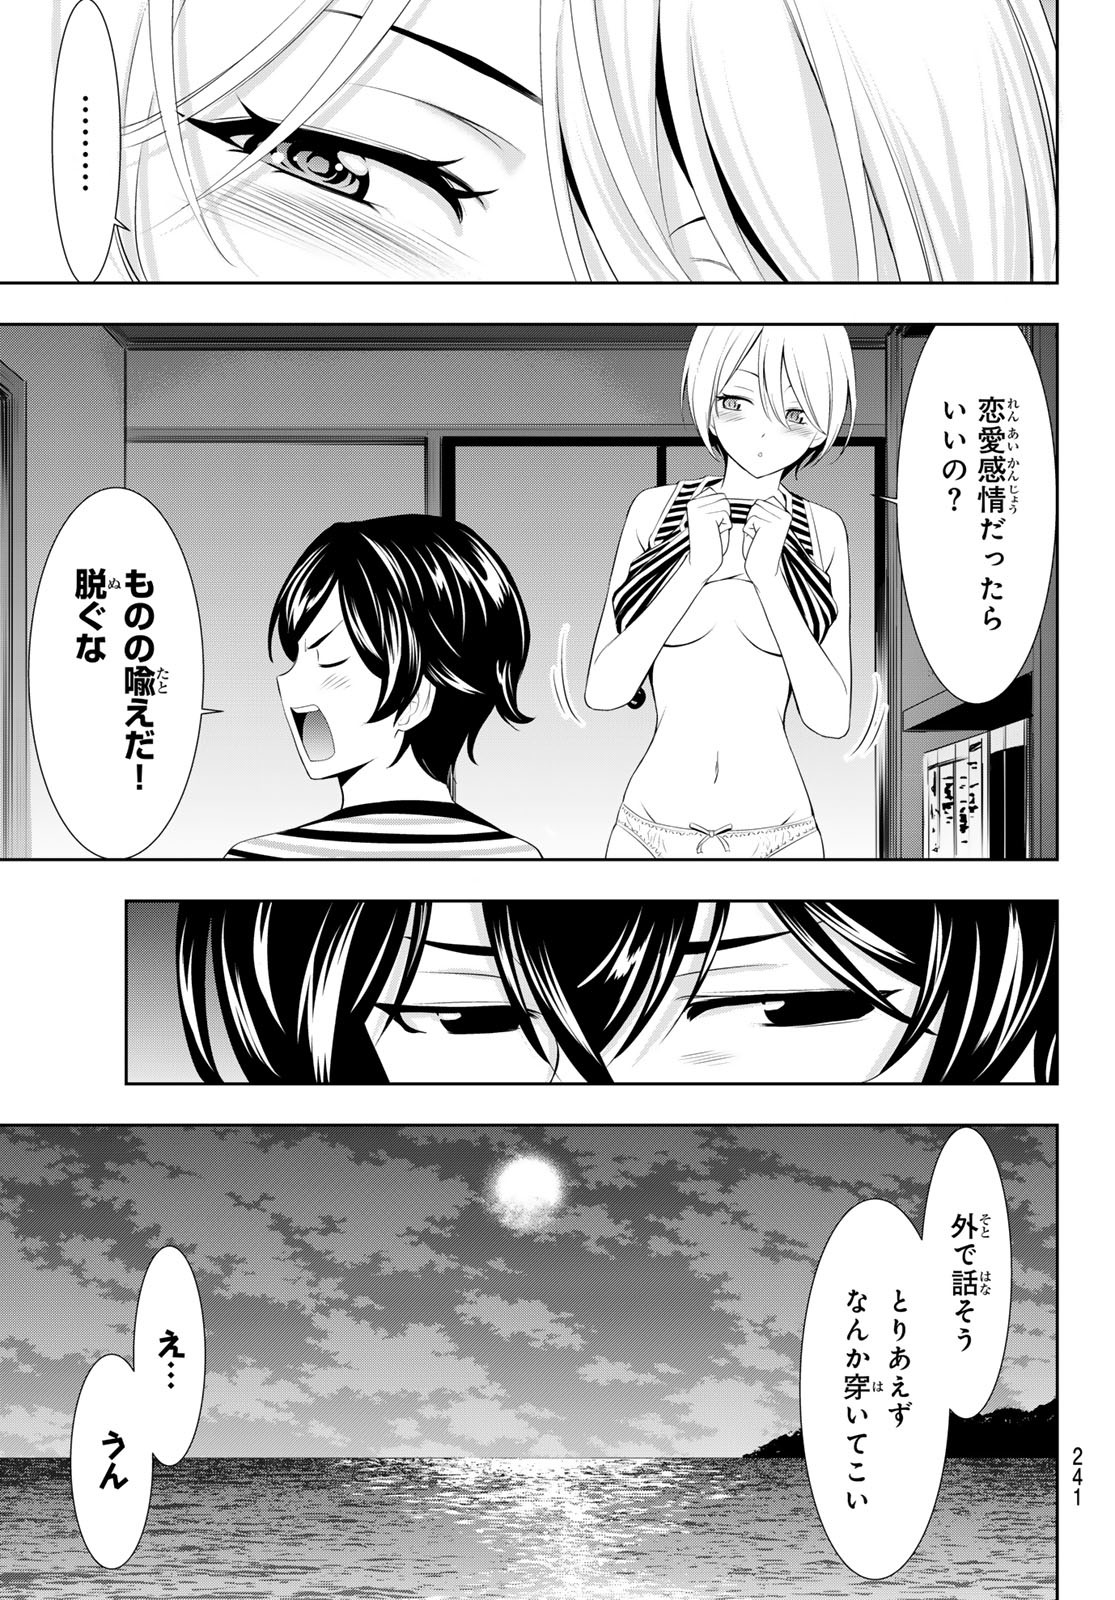 Megami no Cafe Terace - Chapter 132 - Page 3